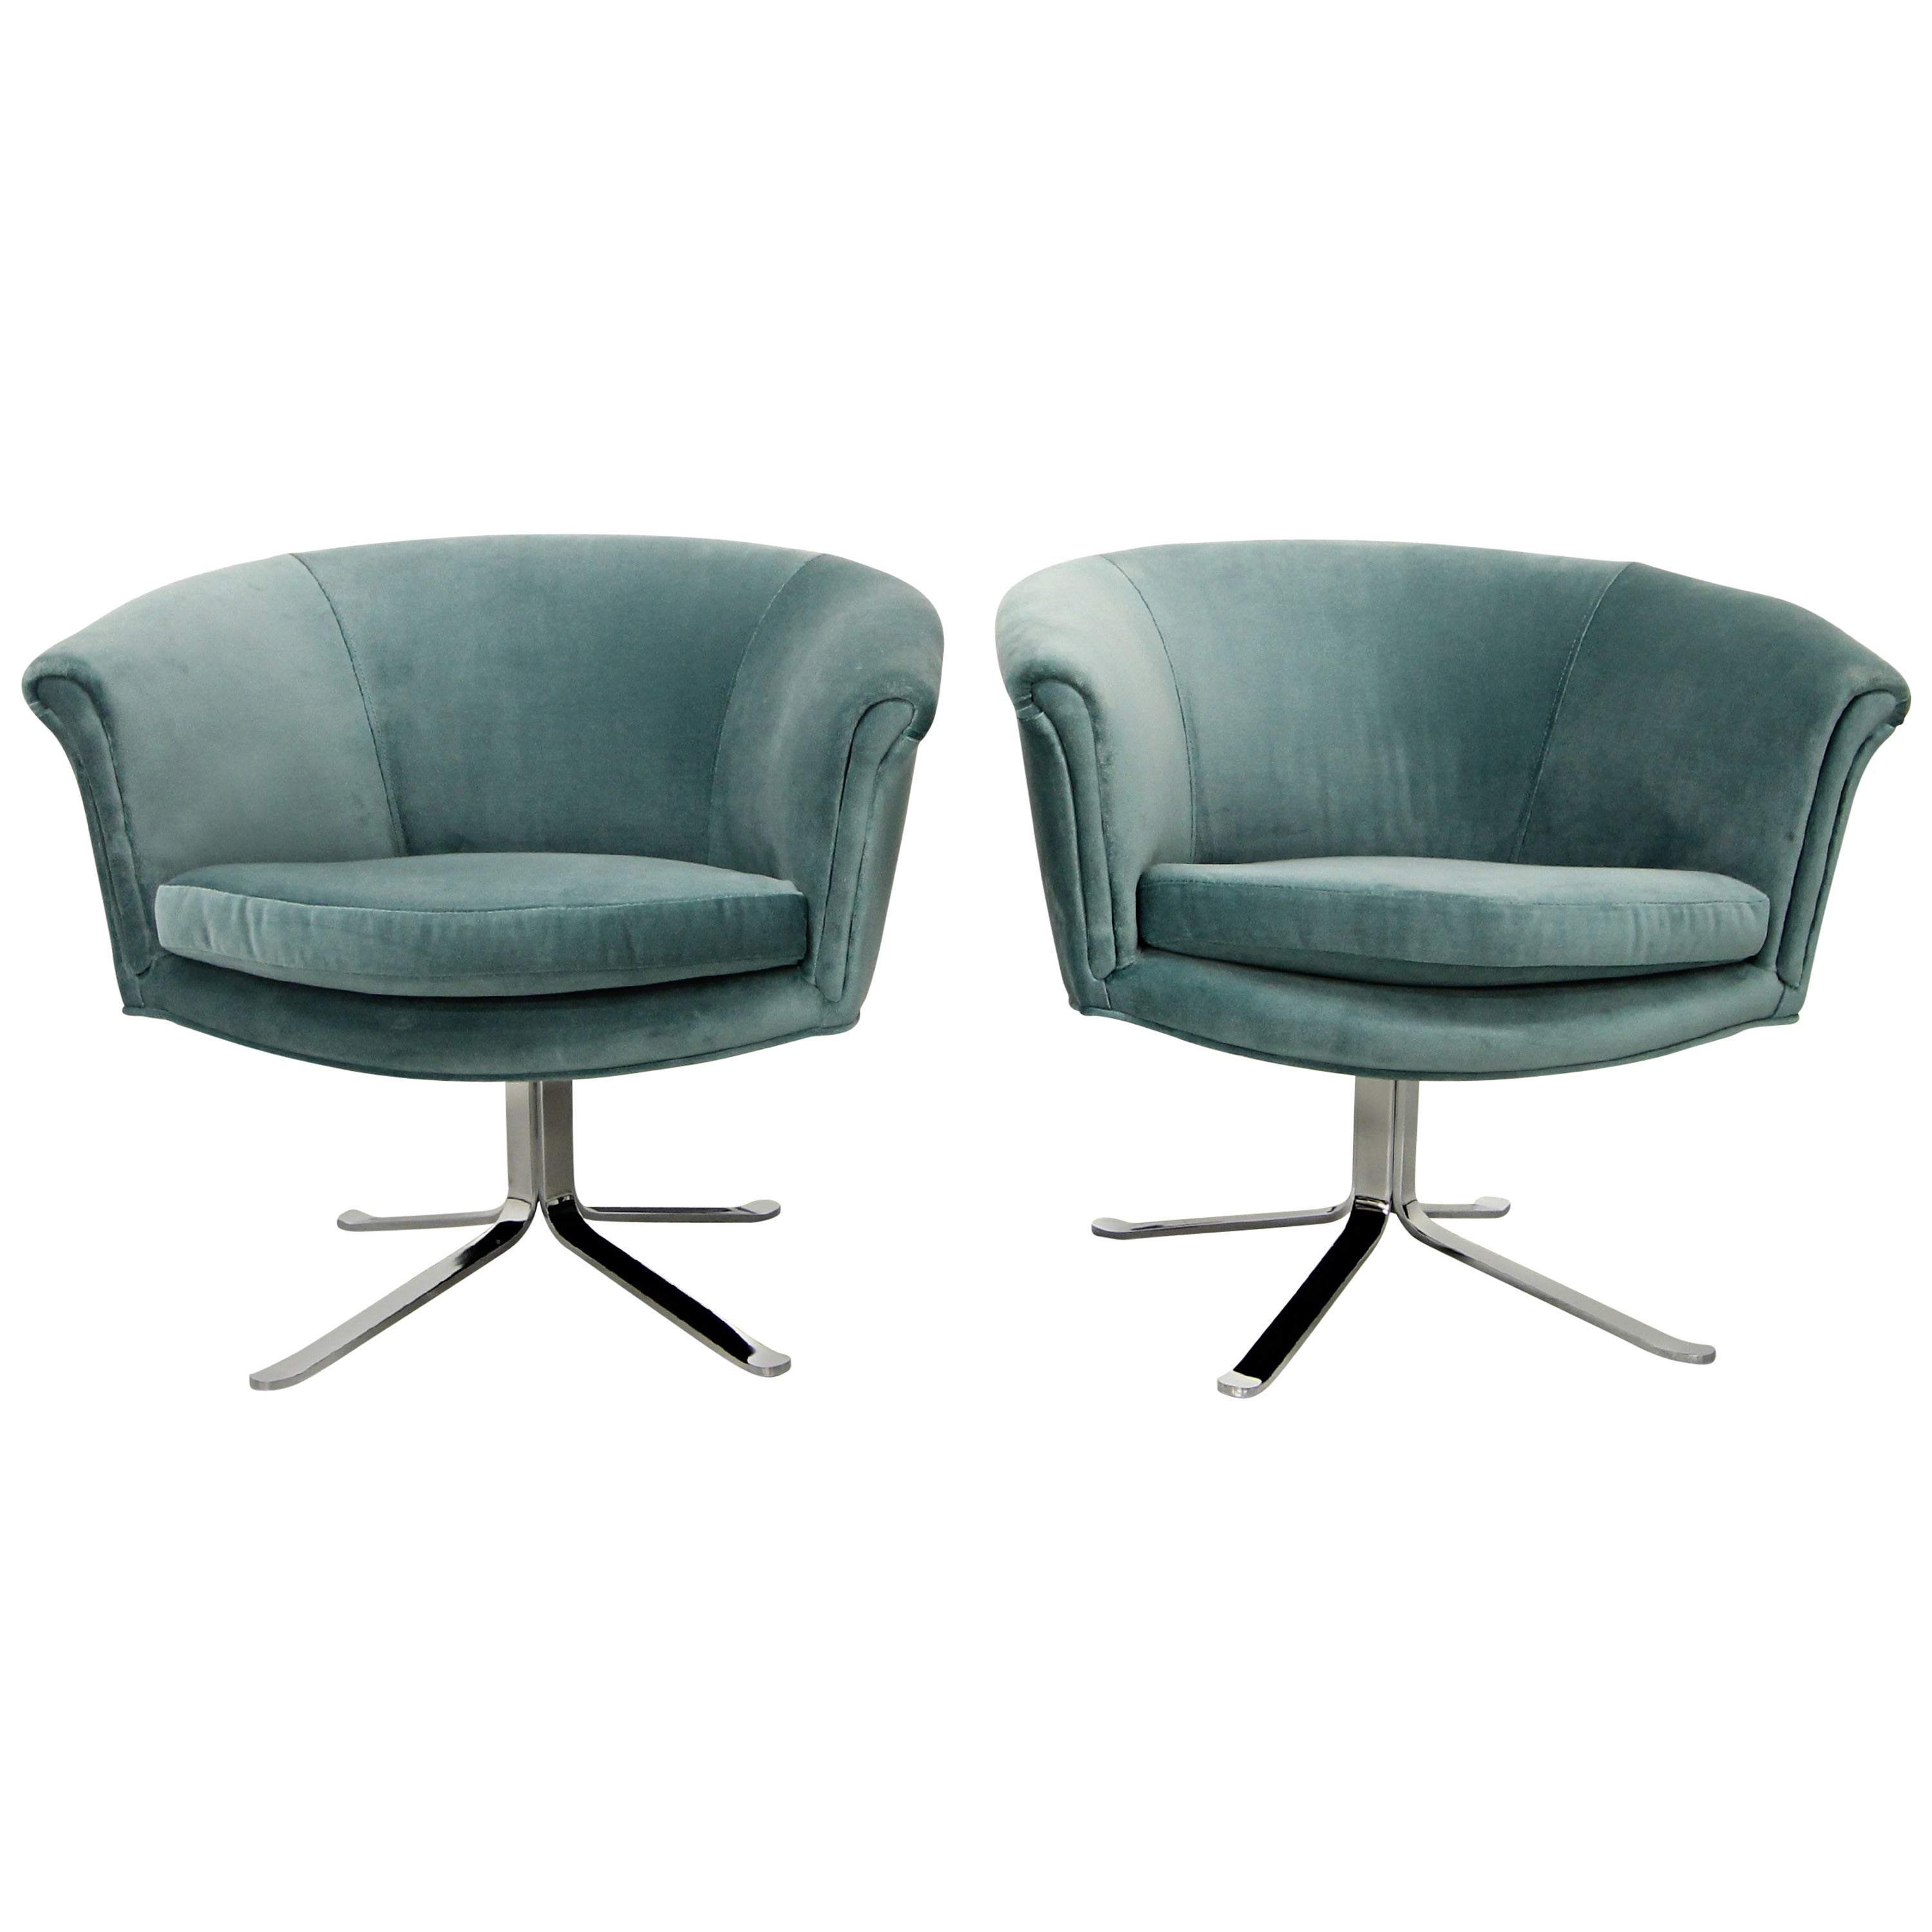 Pair of Midcentury Swivel Chairs with Flat Chrome Bases